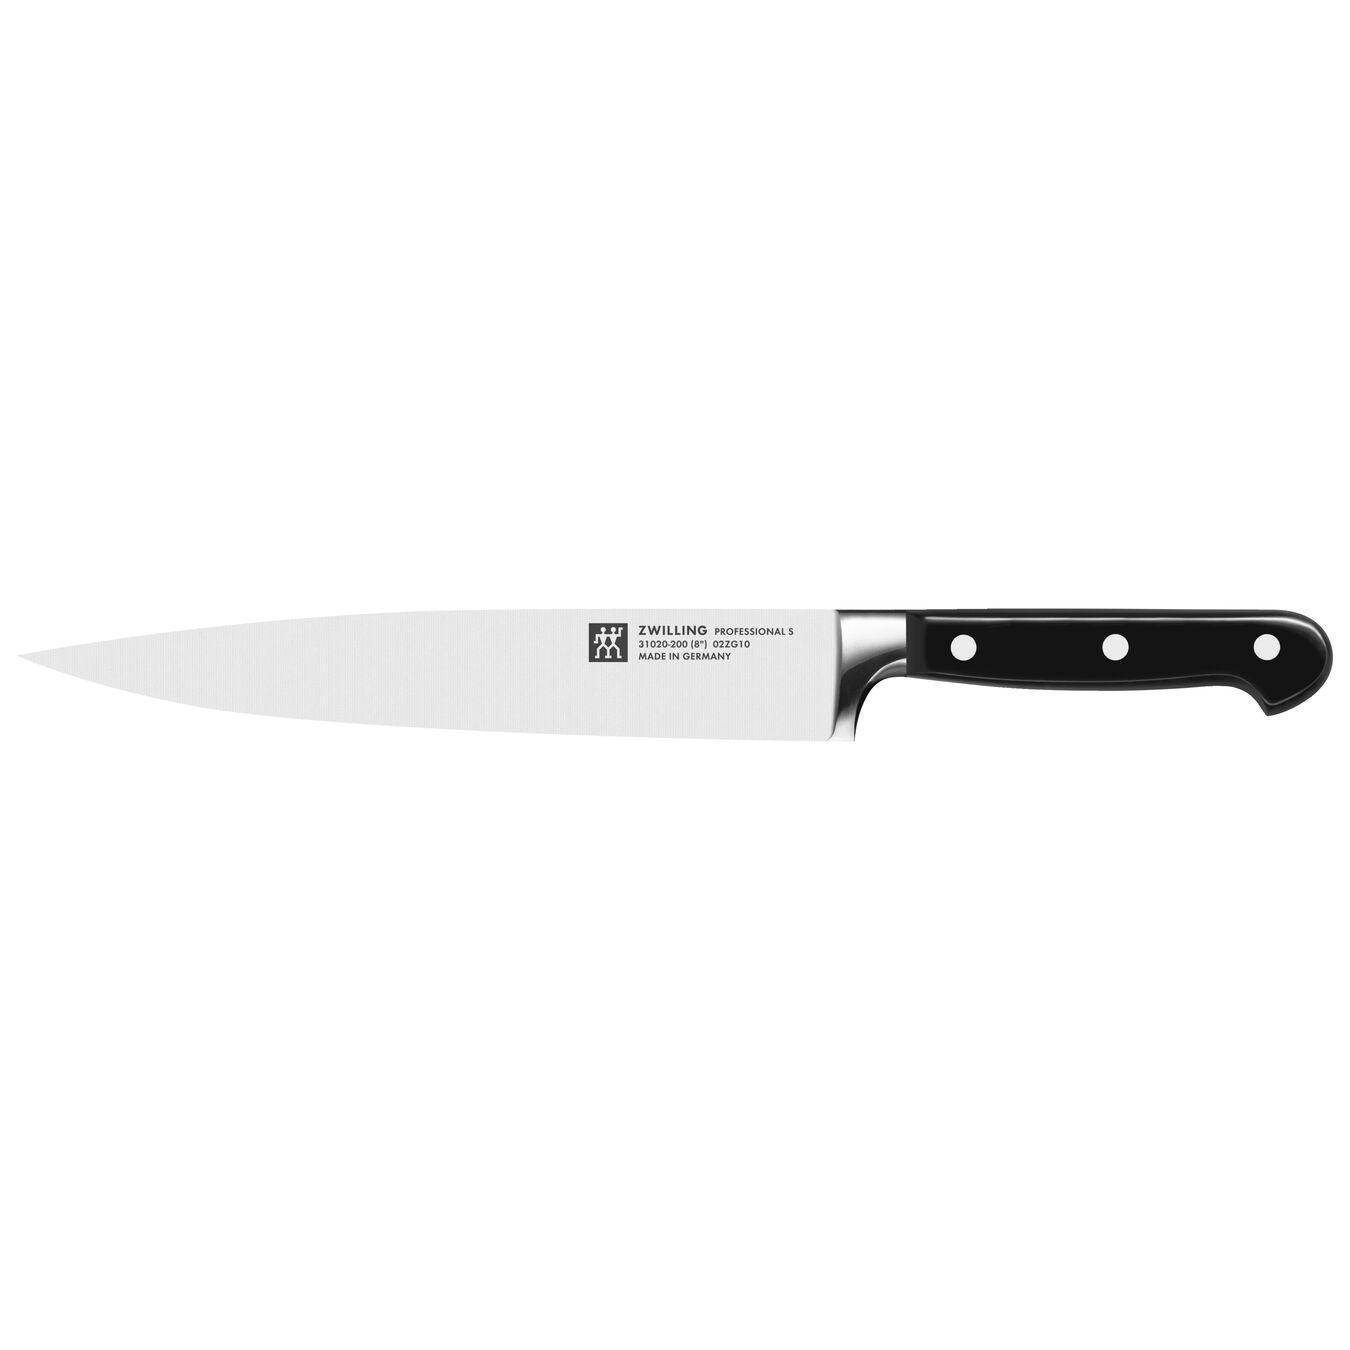 8-inch, Carving knife - Visual Imperfections,,large 1